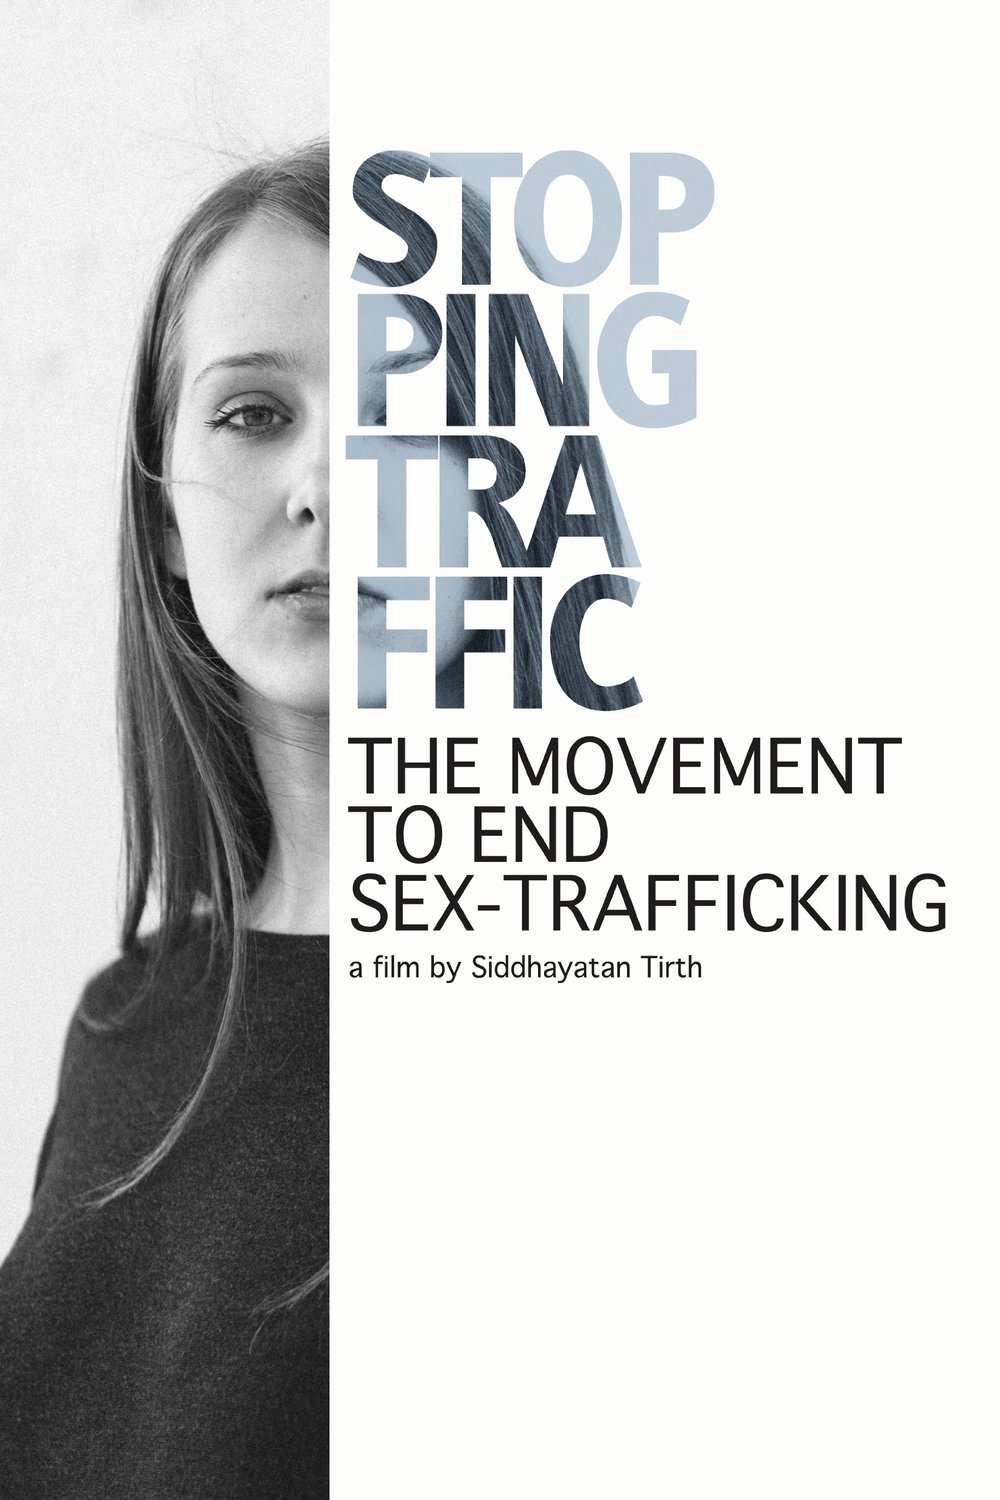 L'affiche du film Stopping Traffic: The Movement to End Sex-Trafficking